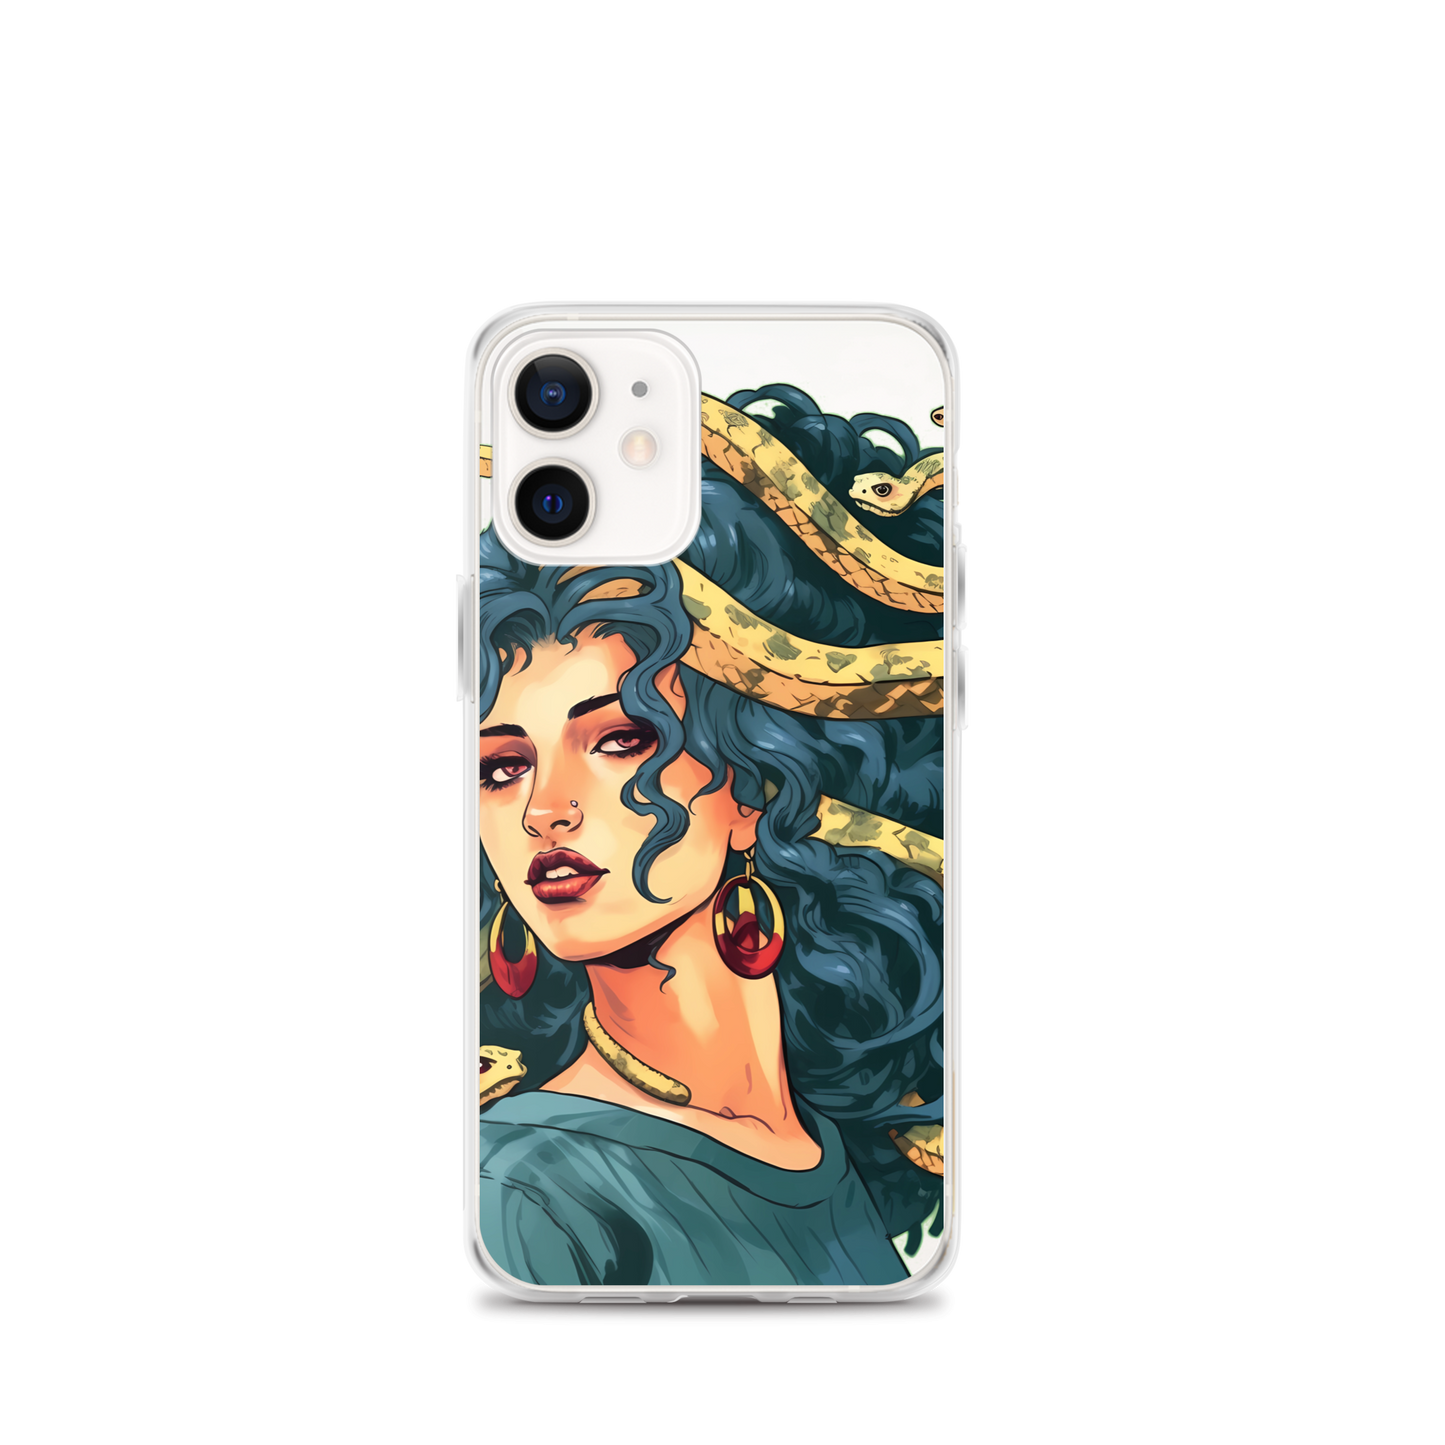 Medusa Enchantment: Cool iPhone Case with Mythical Charm